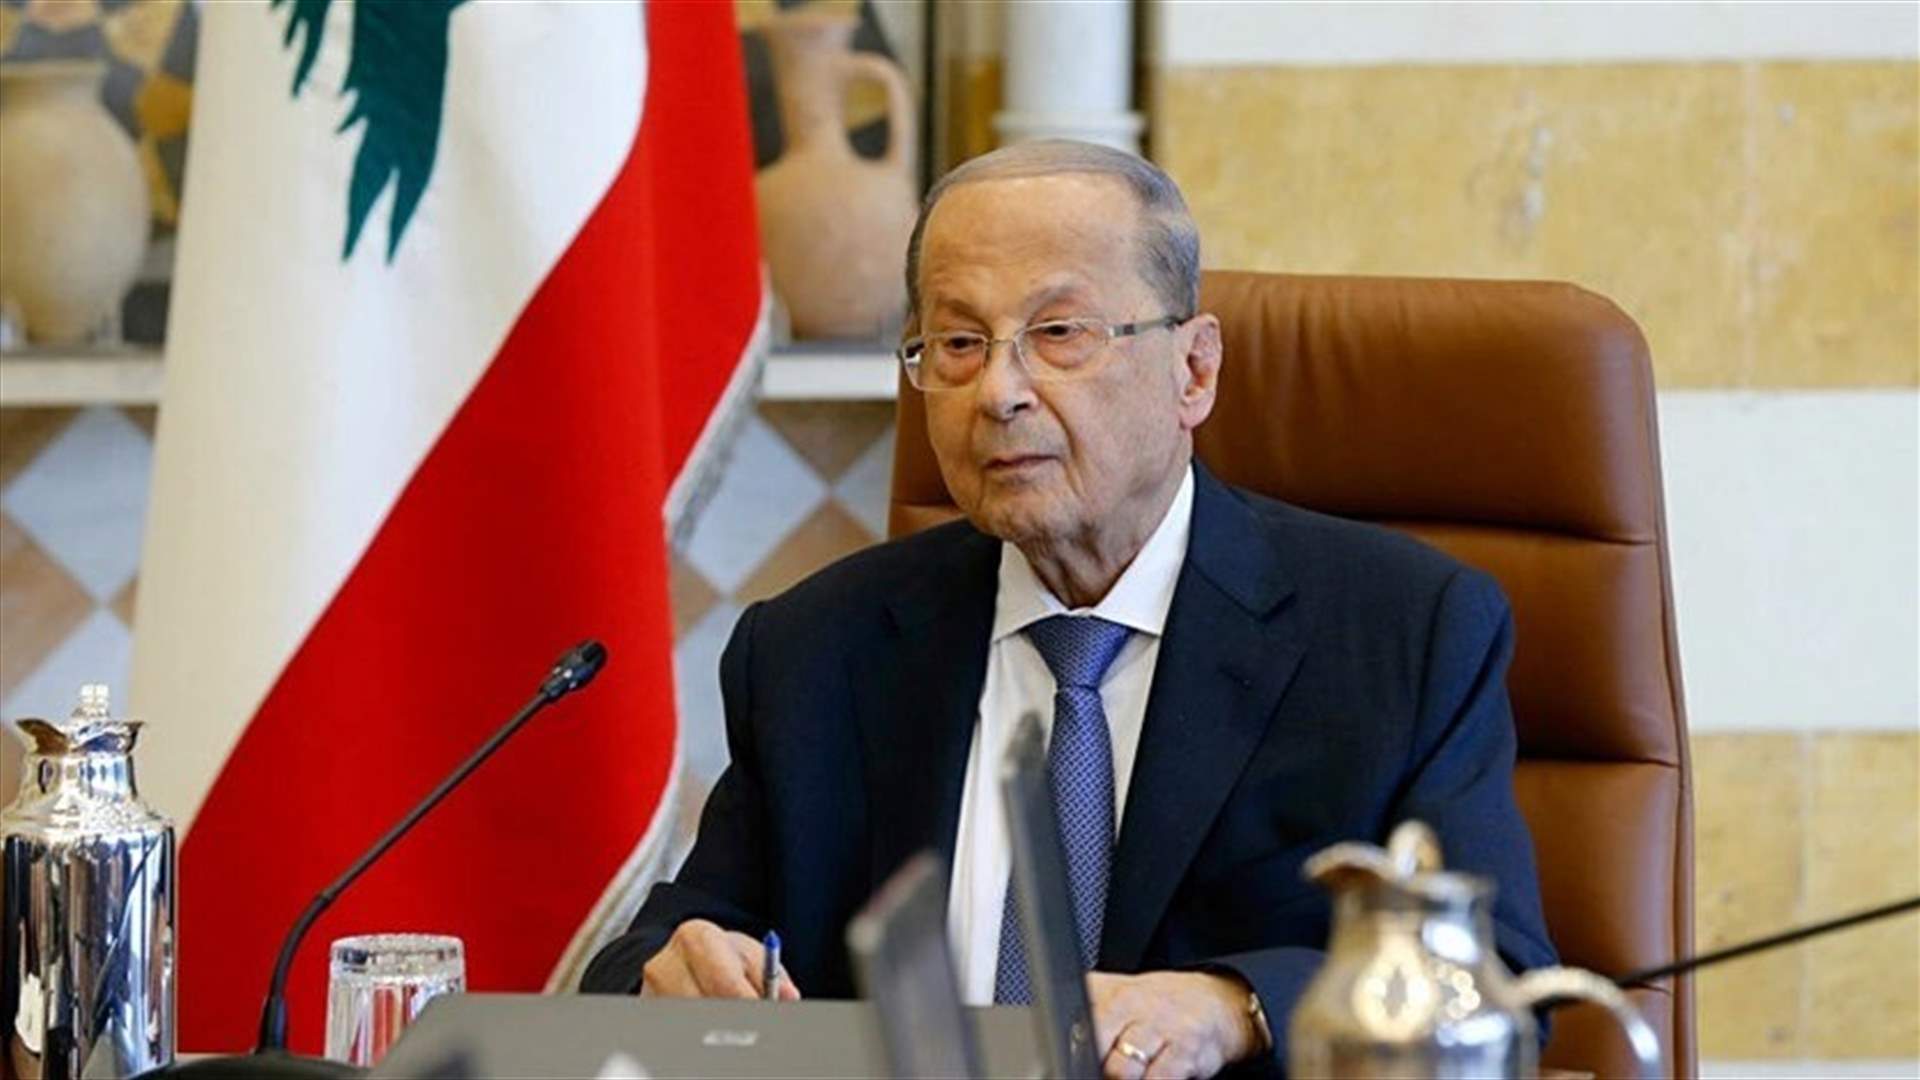 Aoun meets Mikati and Bou Habib over Israel evaluating oil and gas in disputed areas